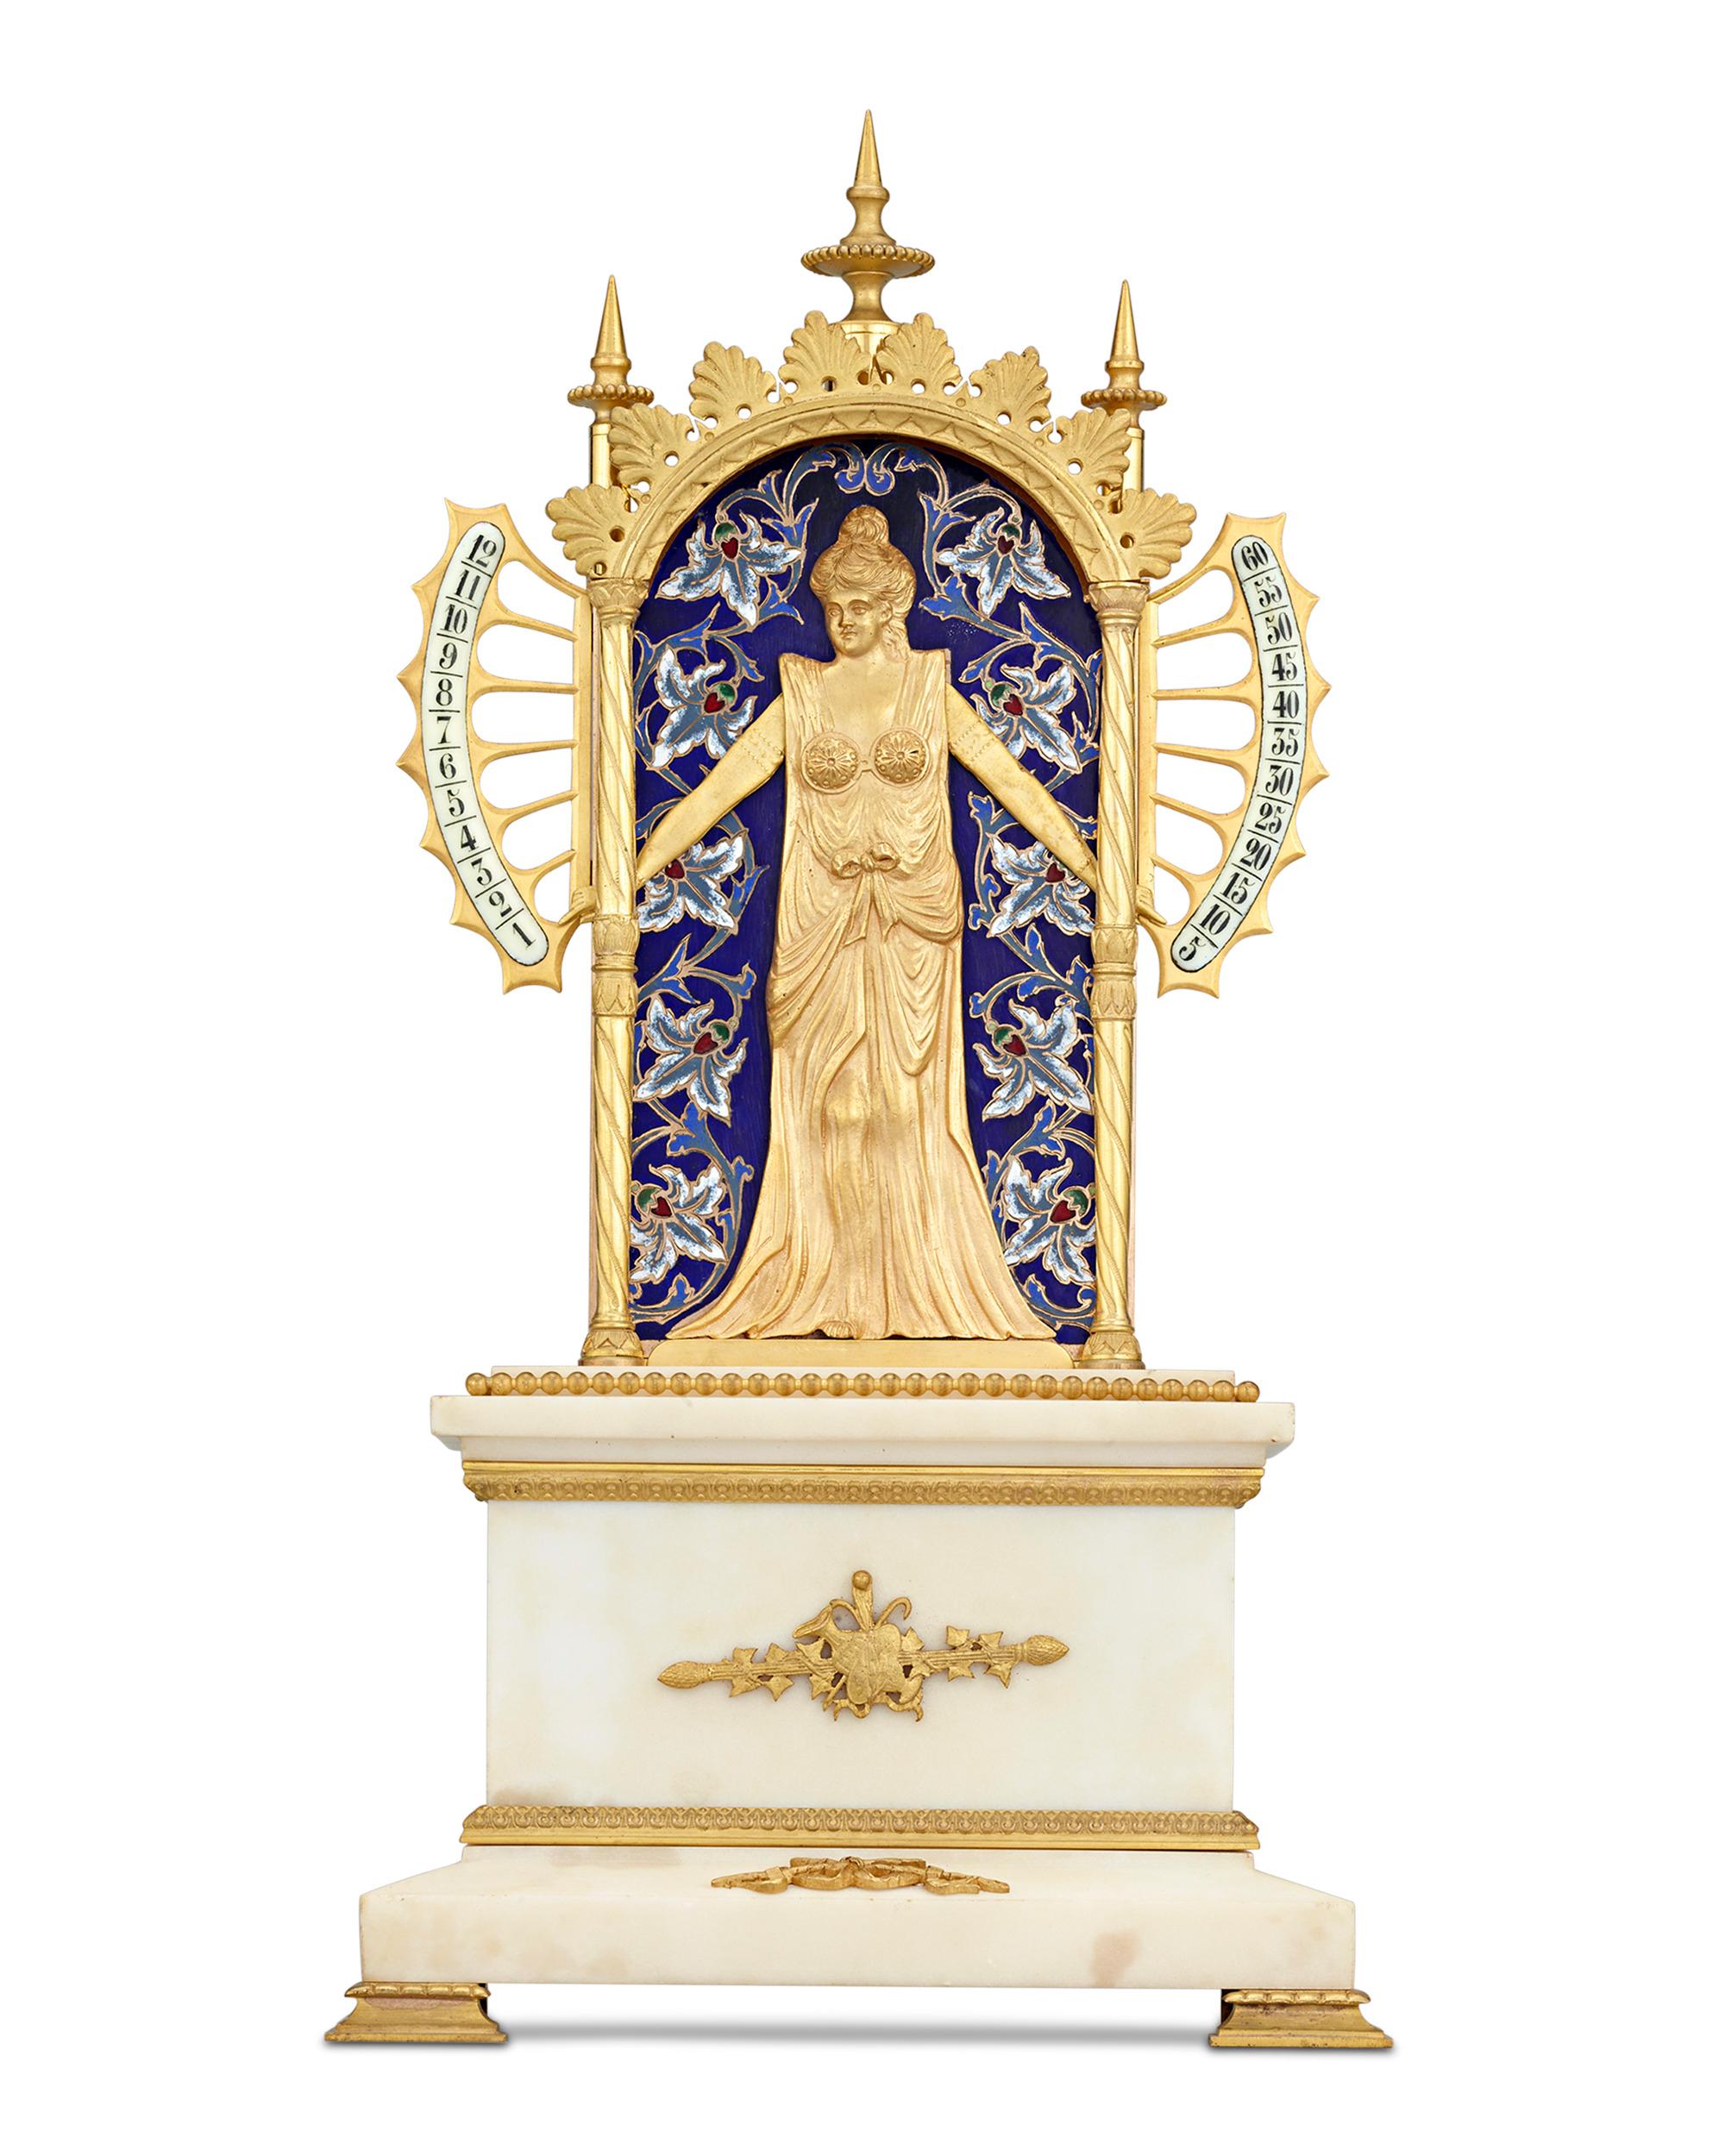 This very rare and spectacular French bras en l'air (arms in air) mantel clock features a lovely doré bronze maiden who indicates the time with her extended arms and fingers pointed to the corresponding hours and minutes. Also classified as a